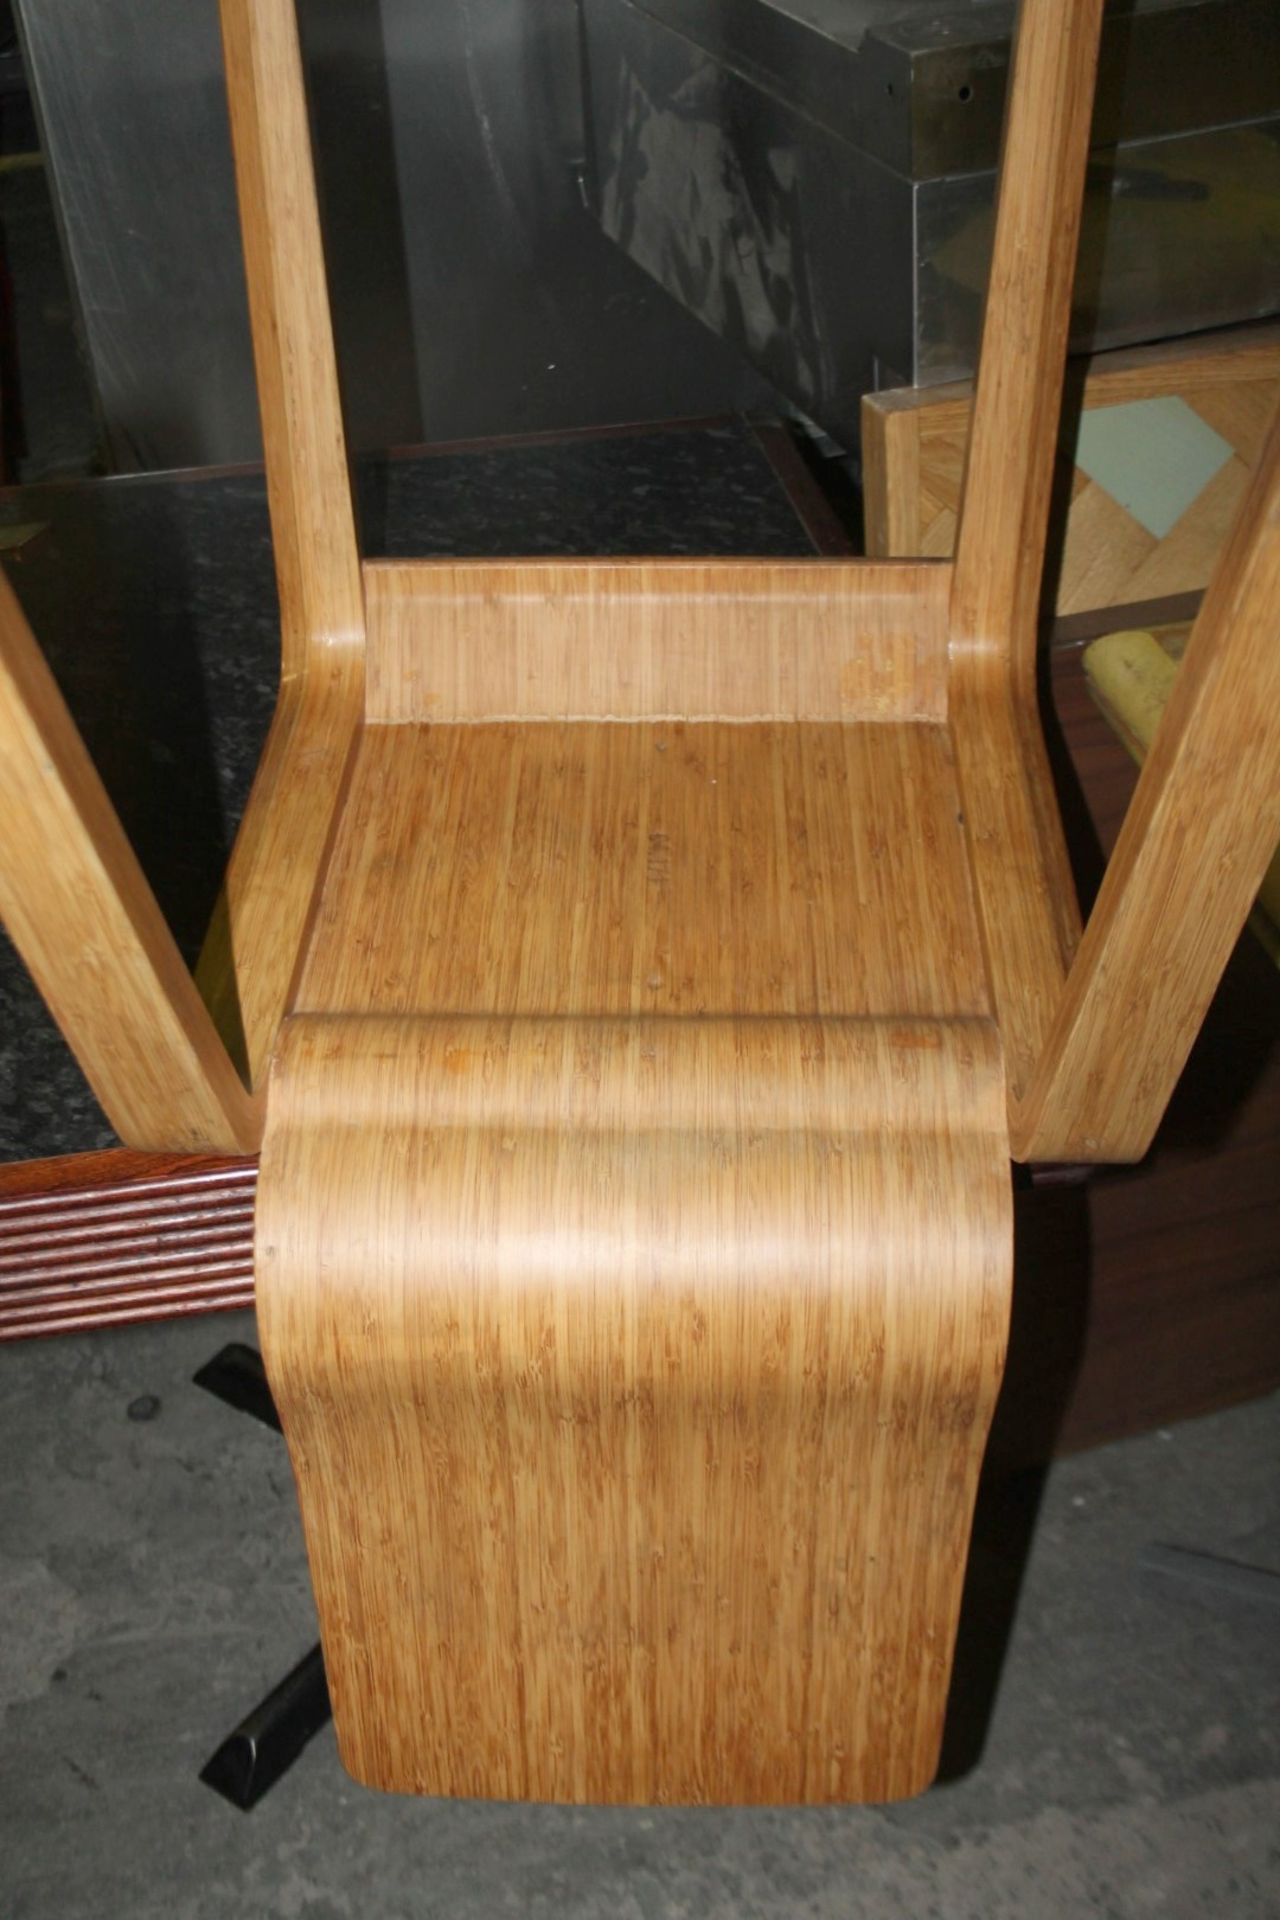 1 x Stylish Wooden Chair With A Curved Design - Dimensions: H80 x W42 x D58cm / Seat 44cm - Ref: - Image 2 of 7